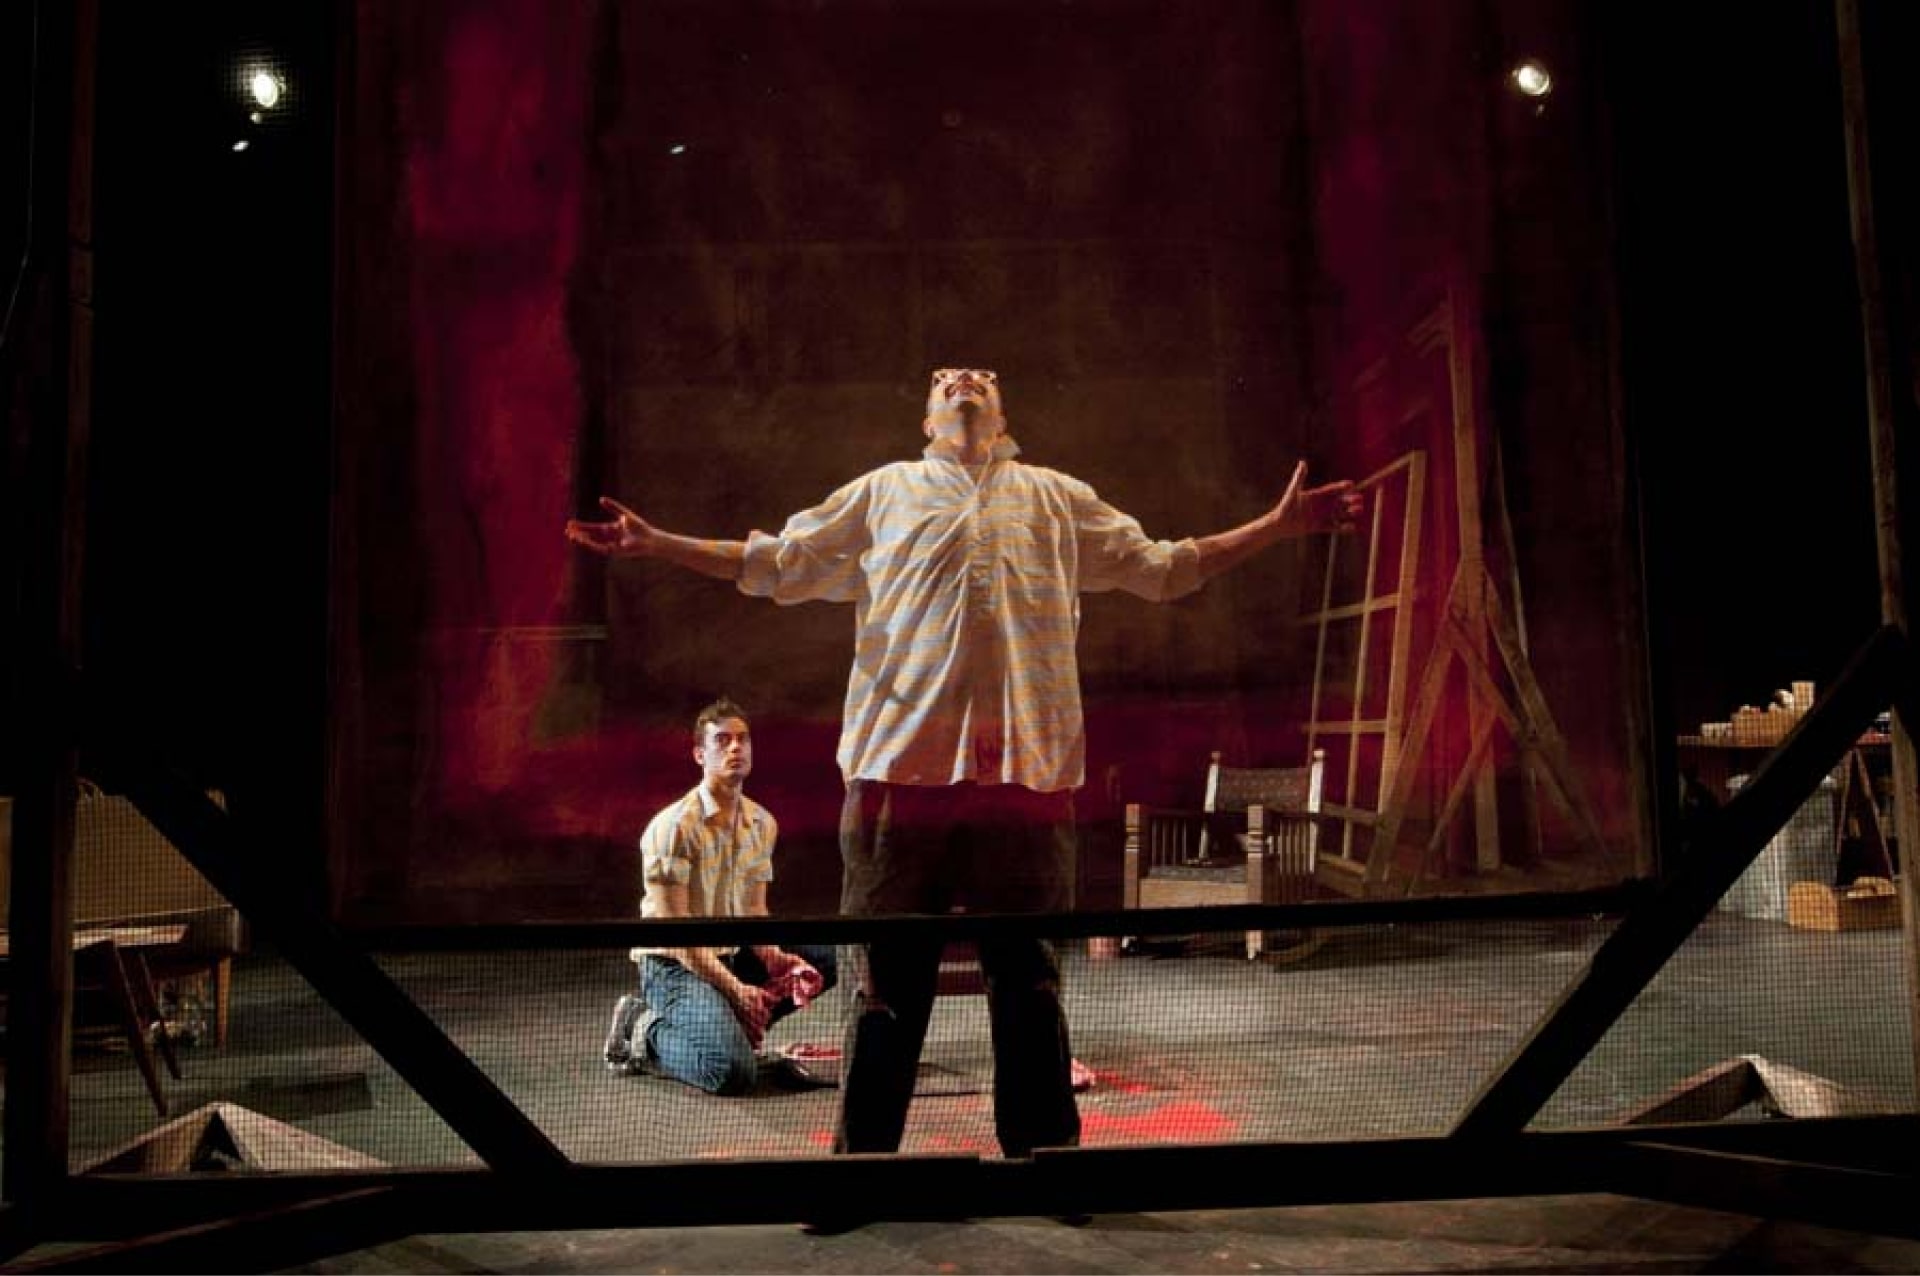 Man stands with arms outstretched seen through transparent canvas, with kneeling man in background.